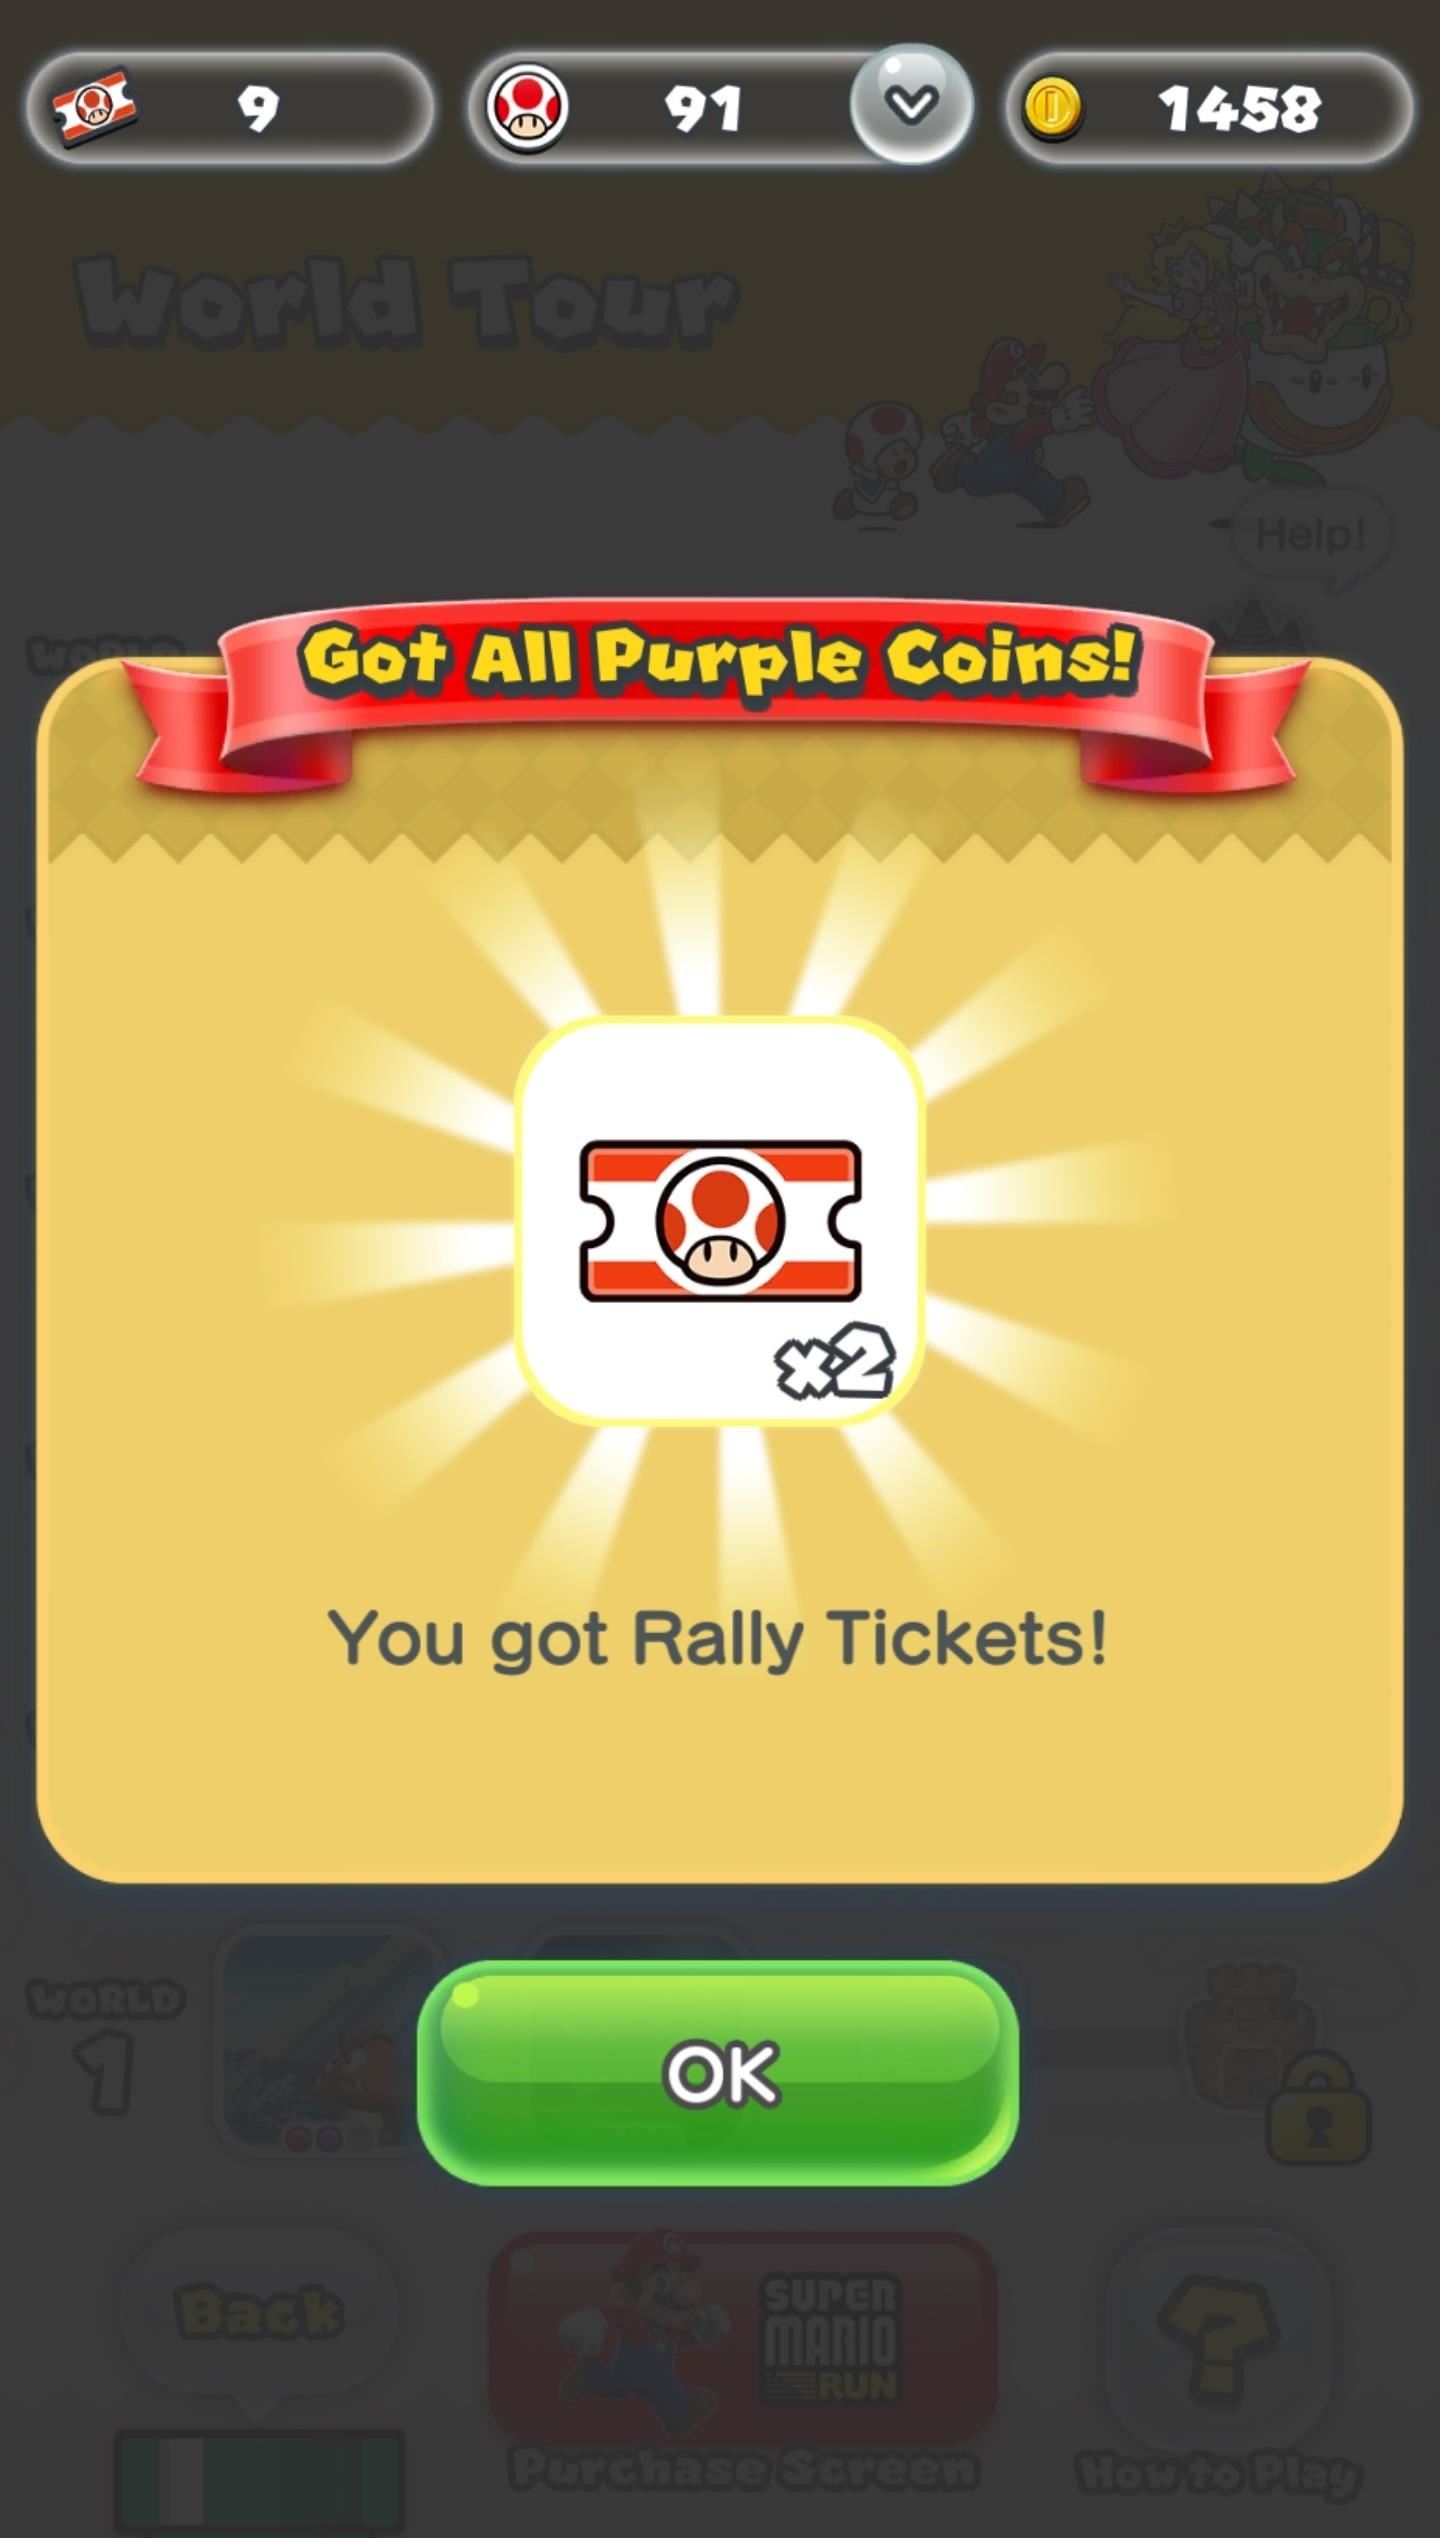 Super Mario Run 101: How to Earn More Toad Rally Tickets